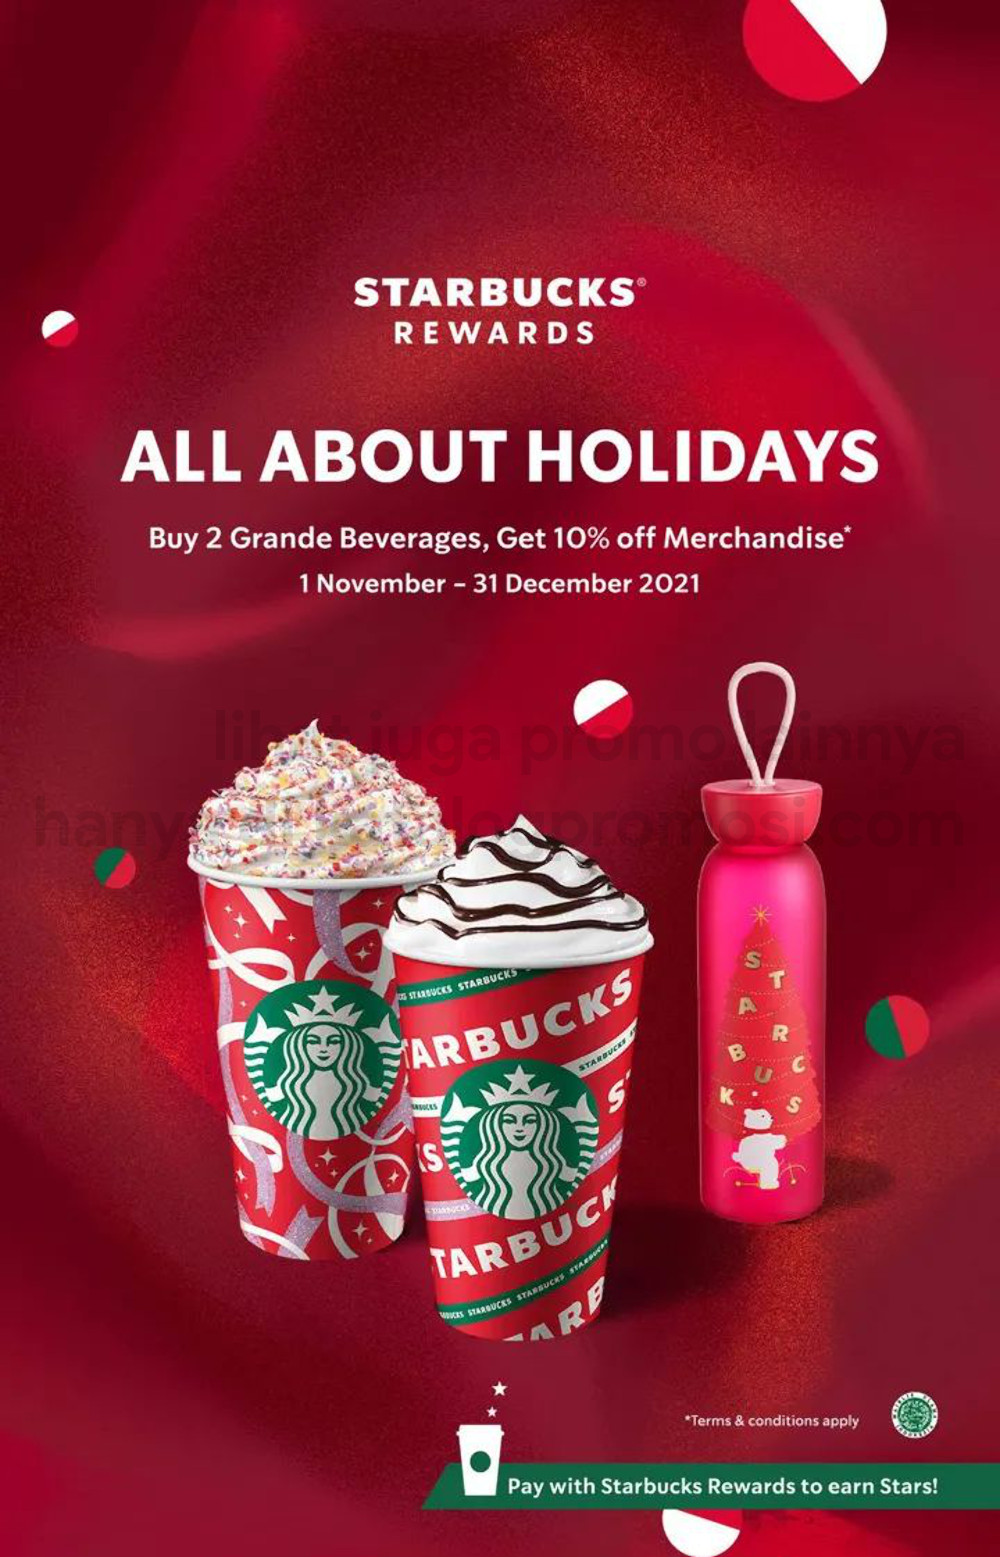 Promo STARBUCKS ALL ABOUT HOLIDAYS! BUY 2 GRANDE SIZE HOLIDAY BEVERAGES, GET 10% OFF FOR HOLIDAY MERCHANDISE 